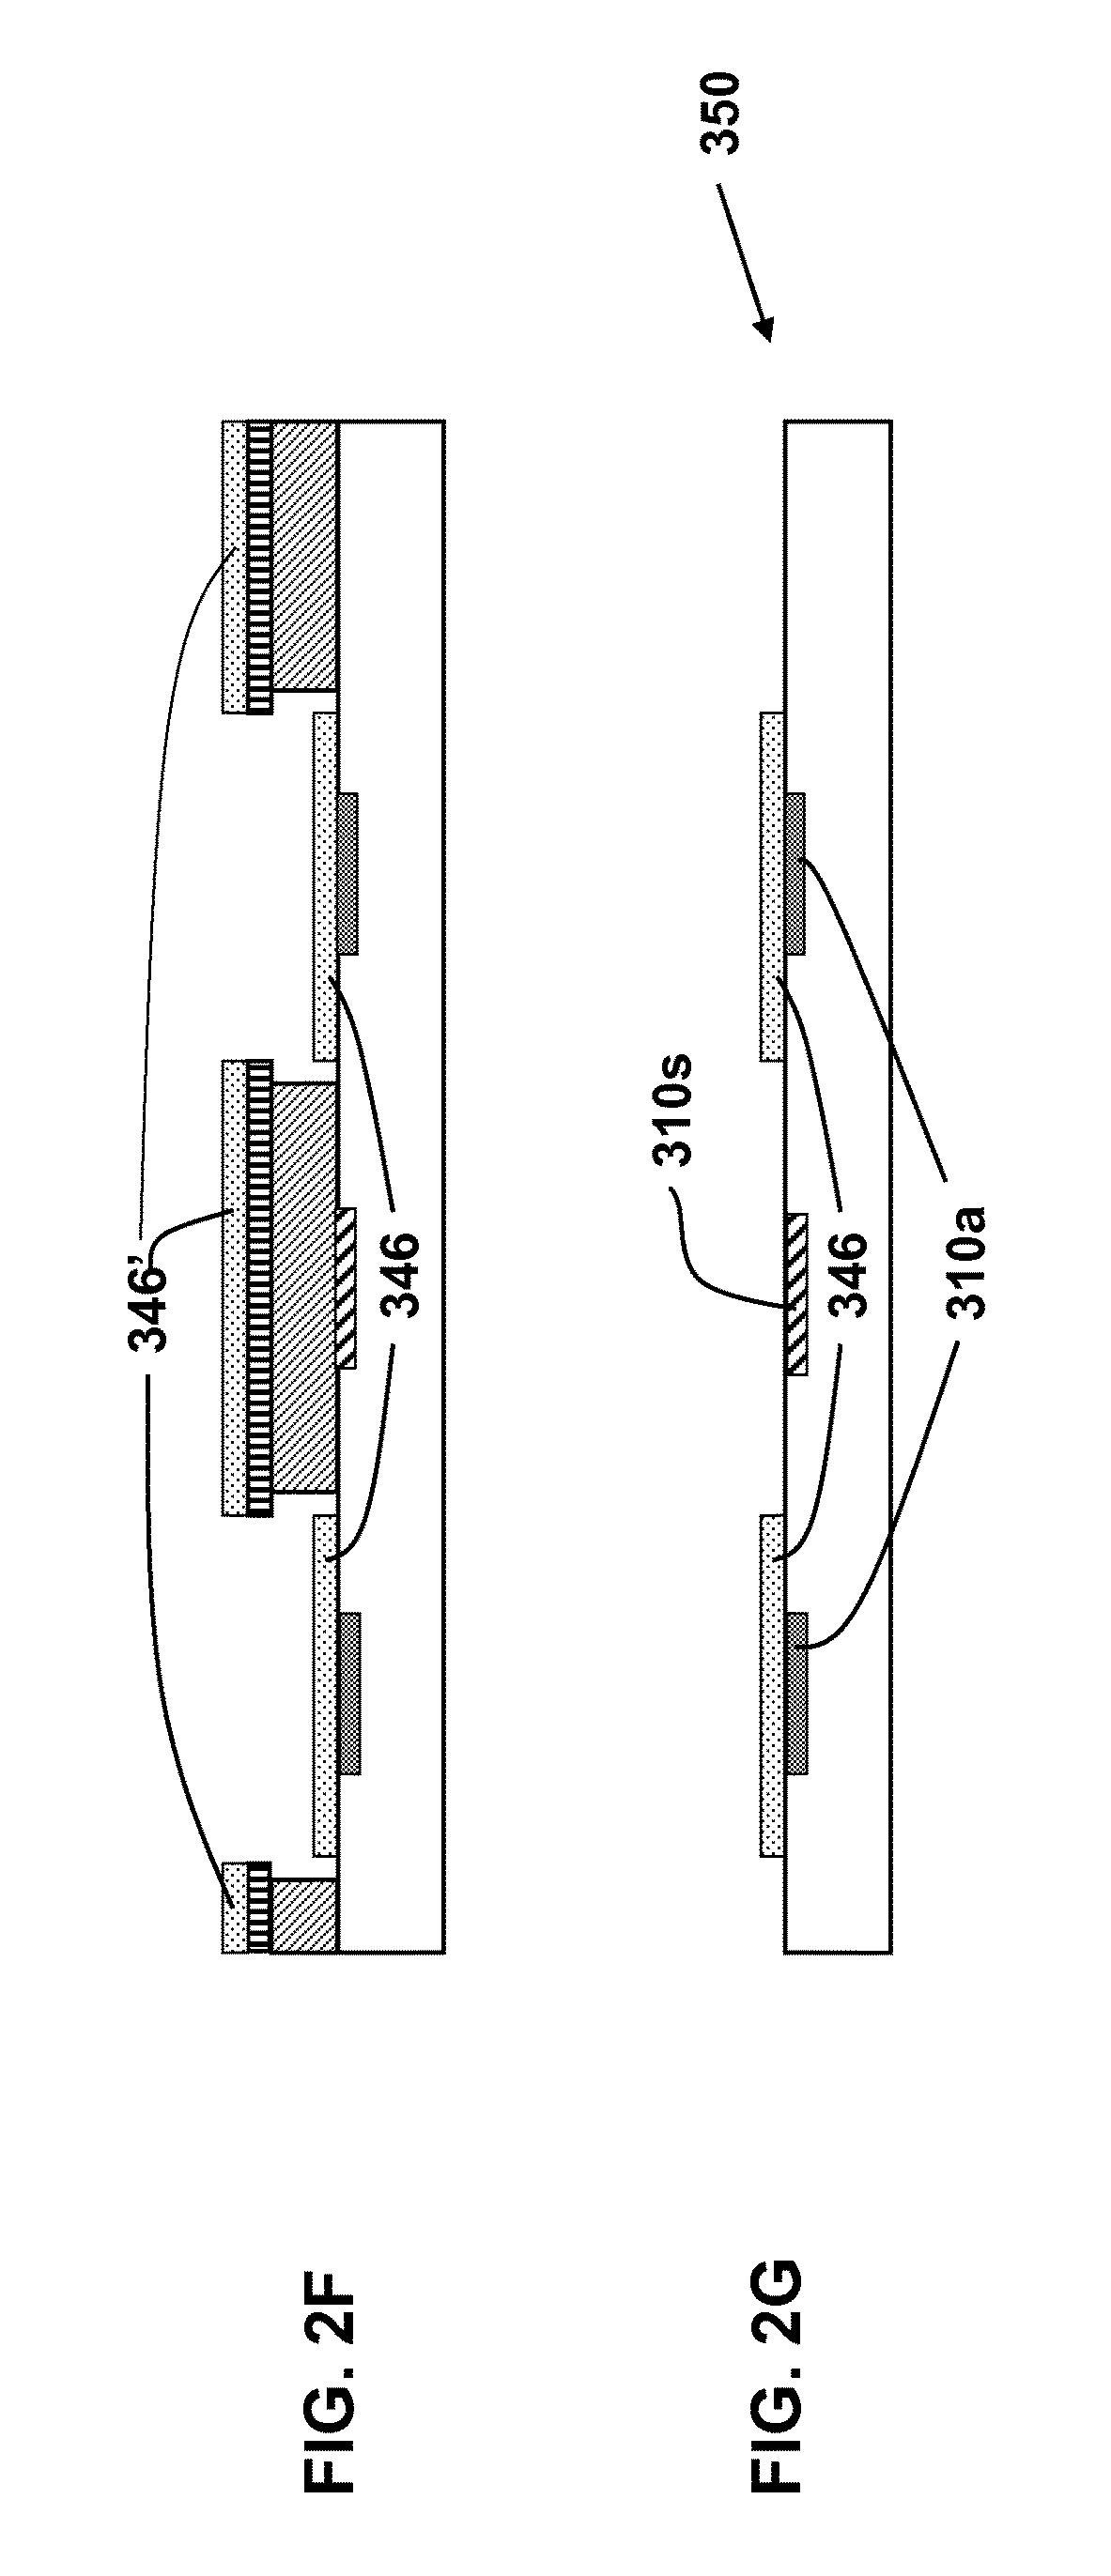 Photolithographic patterning of devices